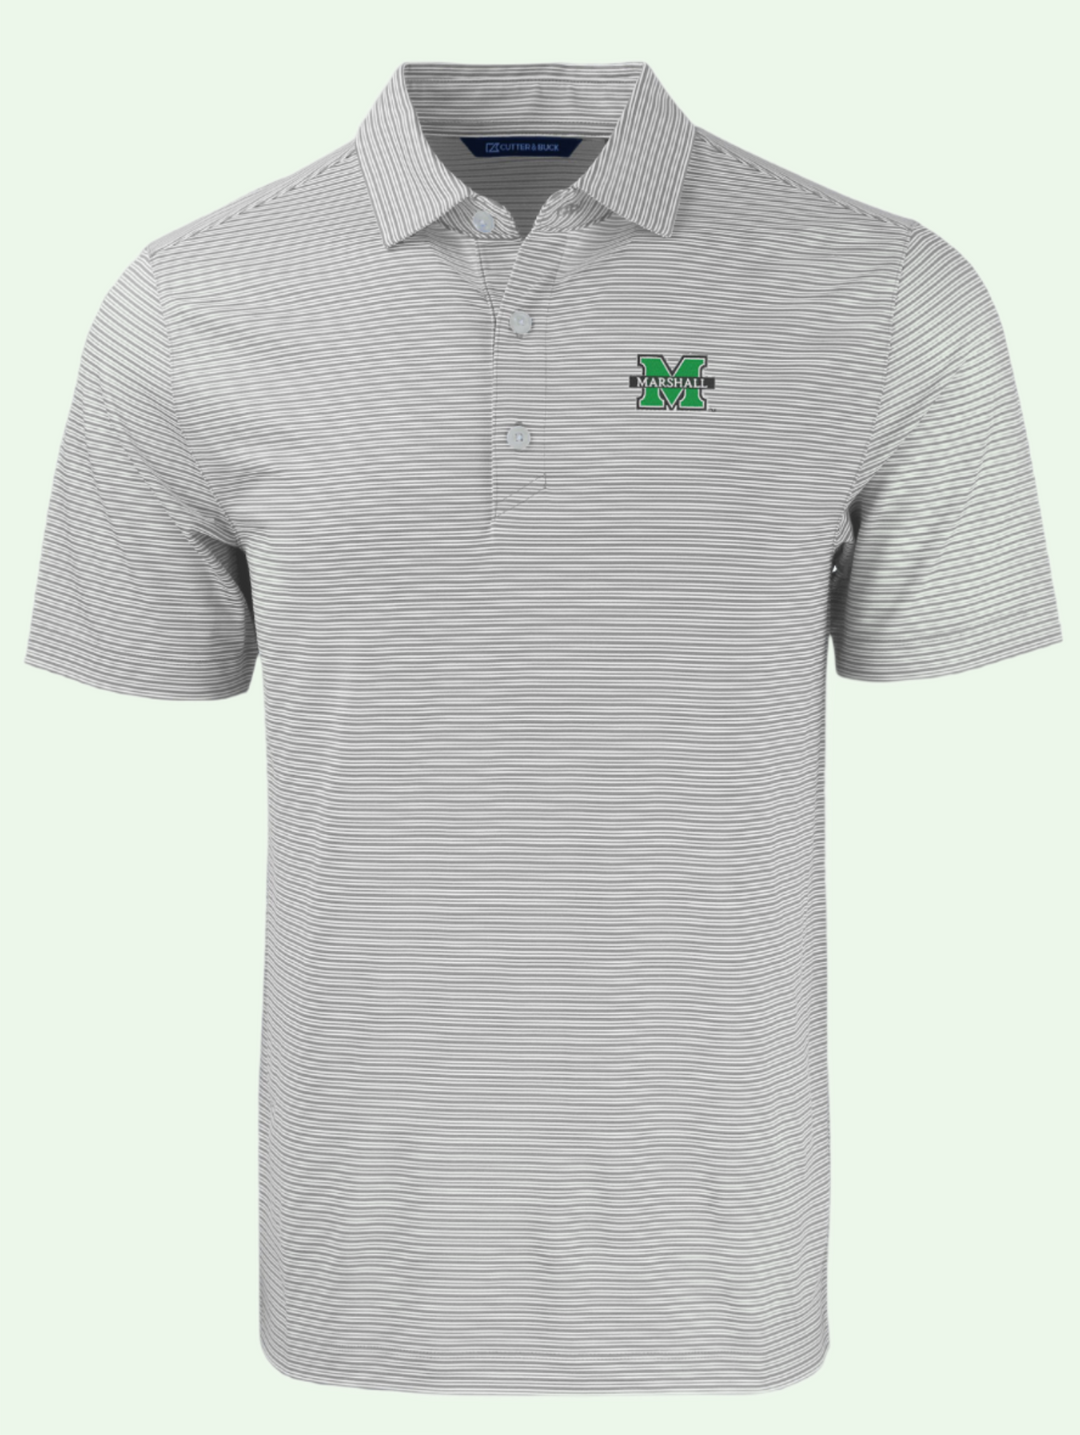 a grey and white striped polo with a Marshall "M" logo on the left chest